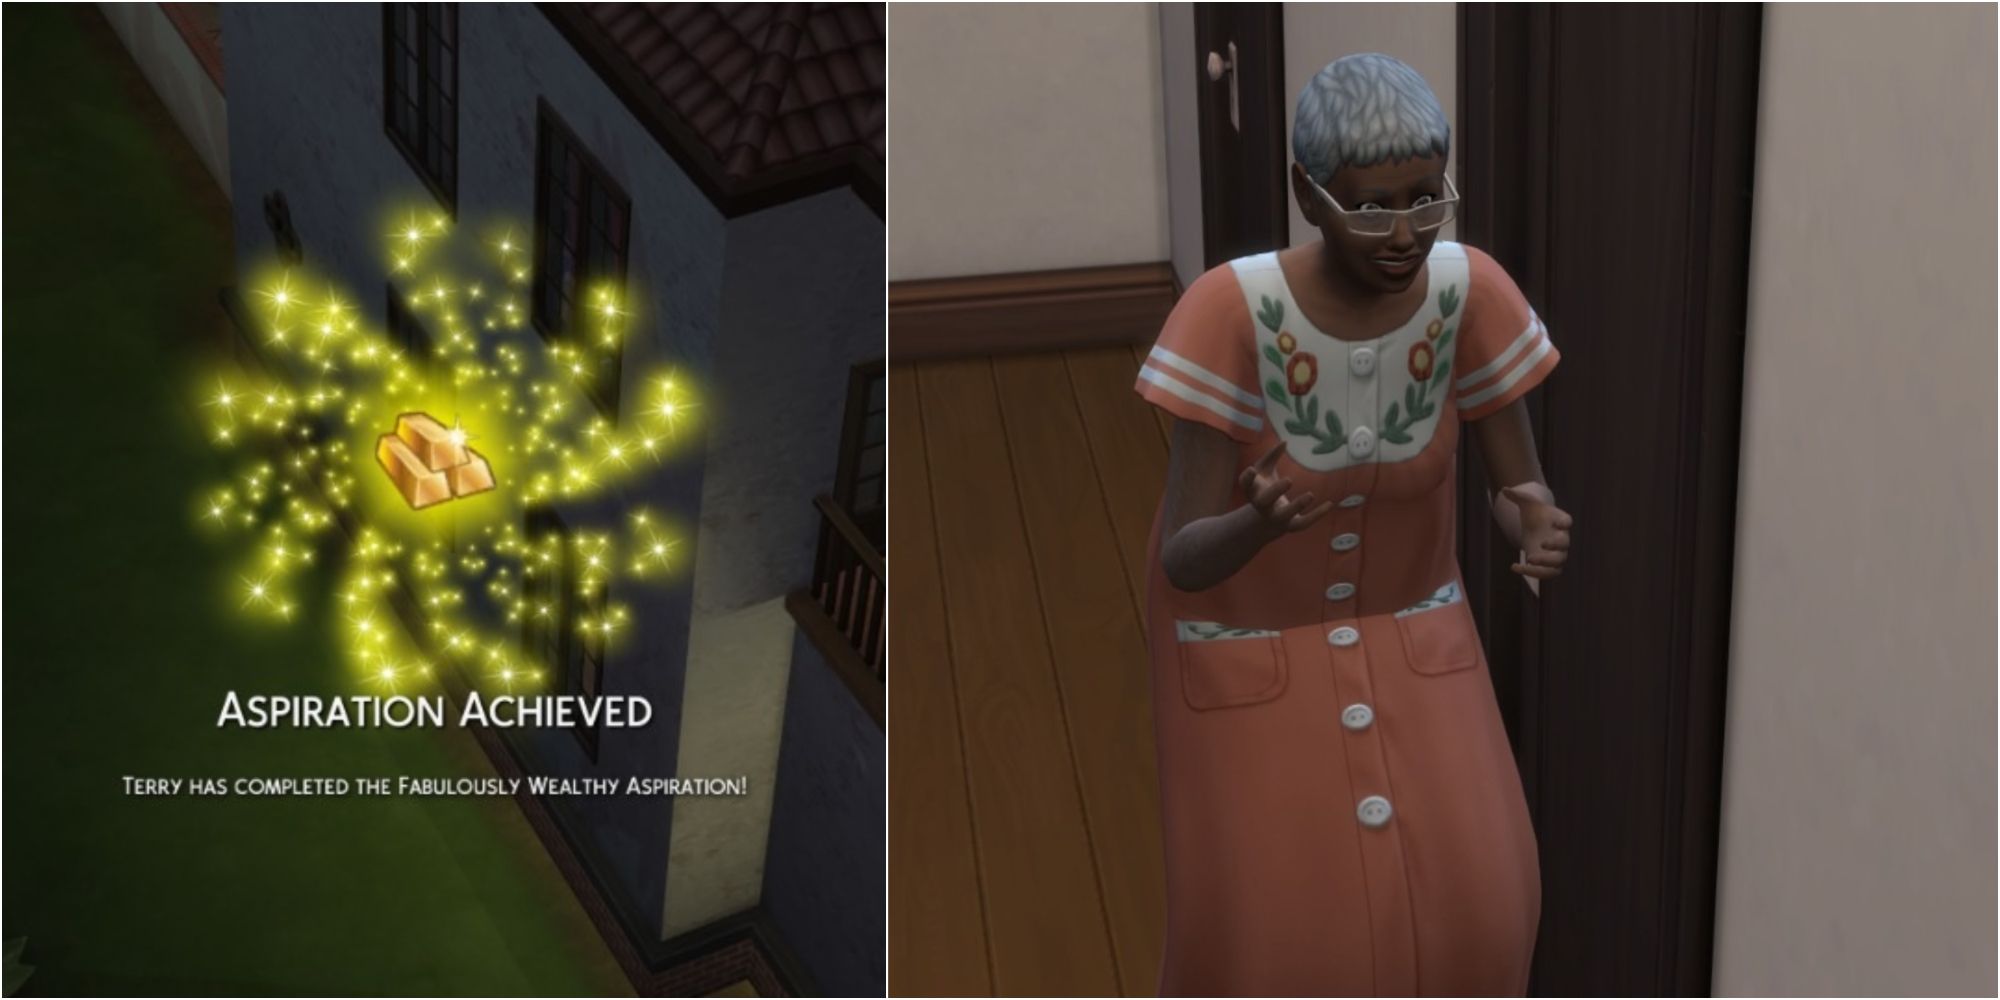 The Sims 4: How to Get Unlimited Money